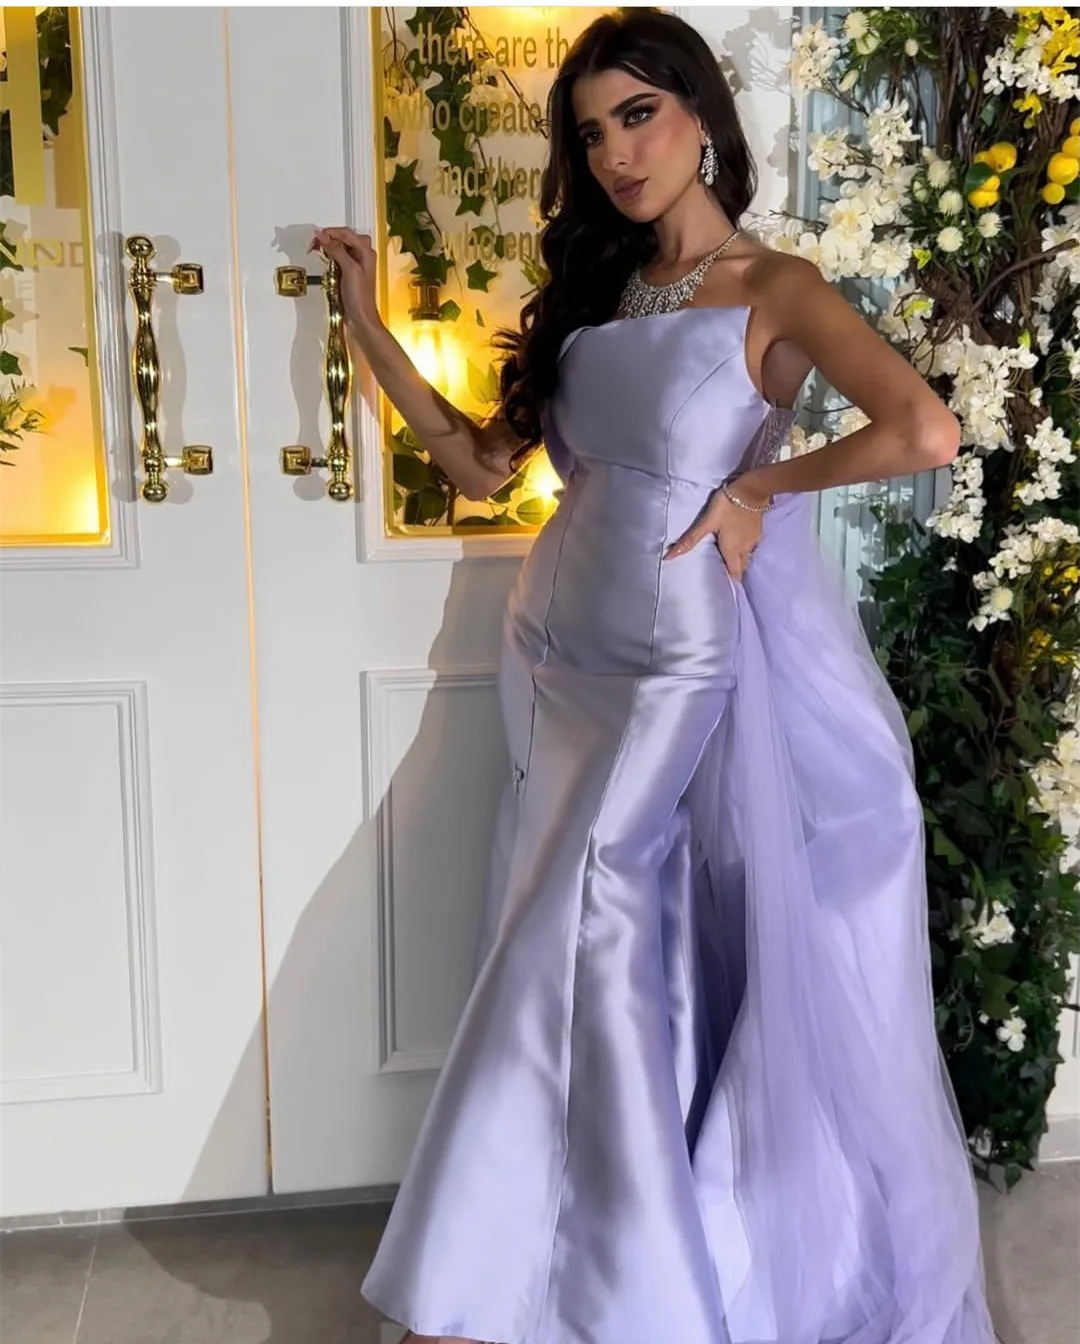 

Classic Lilac Satin Beaded Evening Dresses Mermaid Pleated Sweep Train Prom Dress فساتين السهرة for Formal Party Dress Women